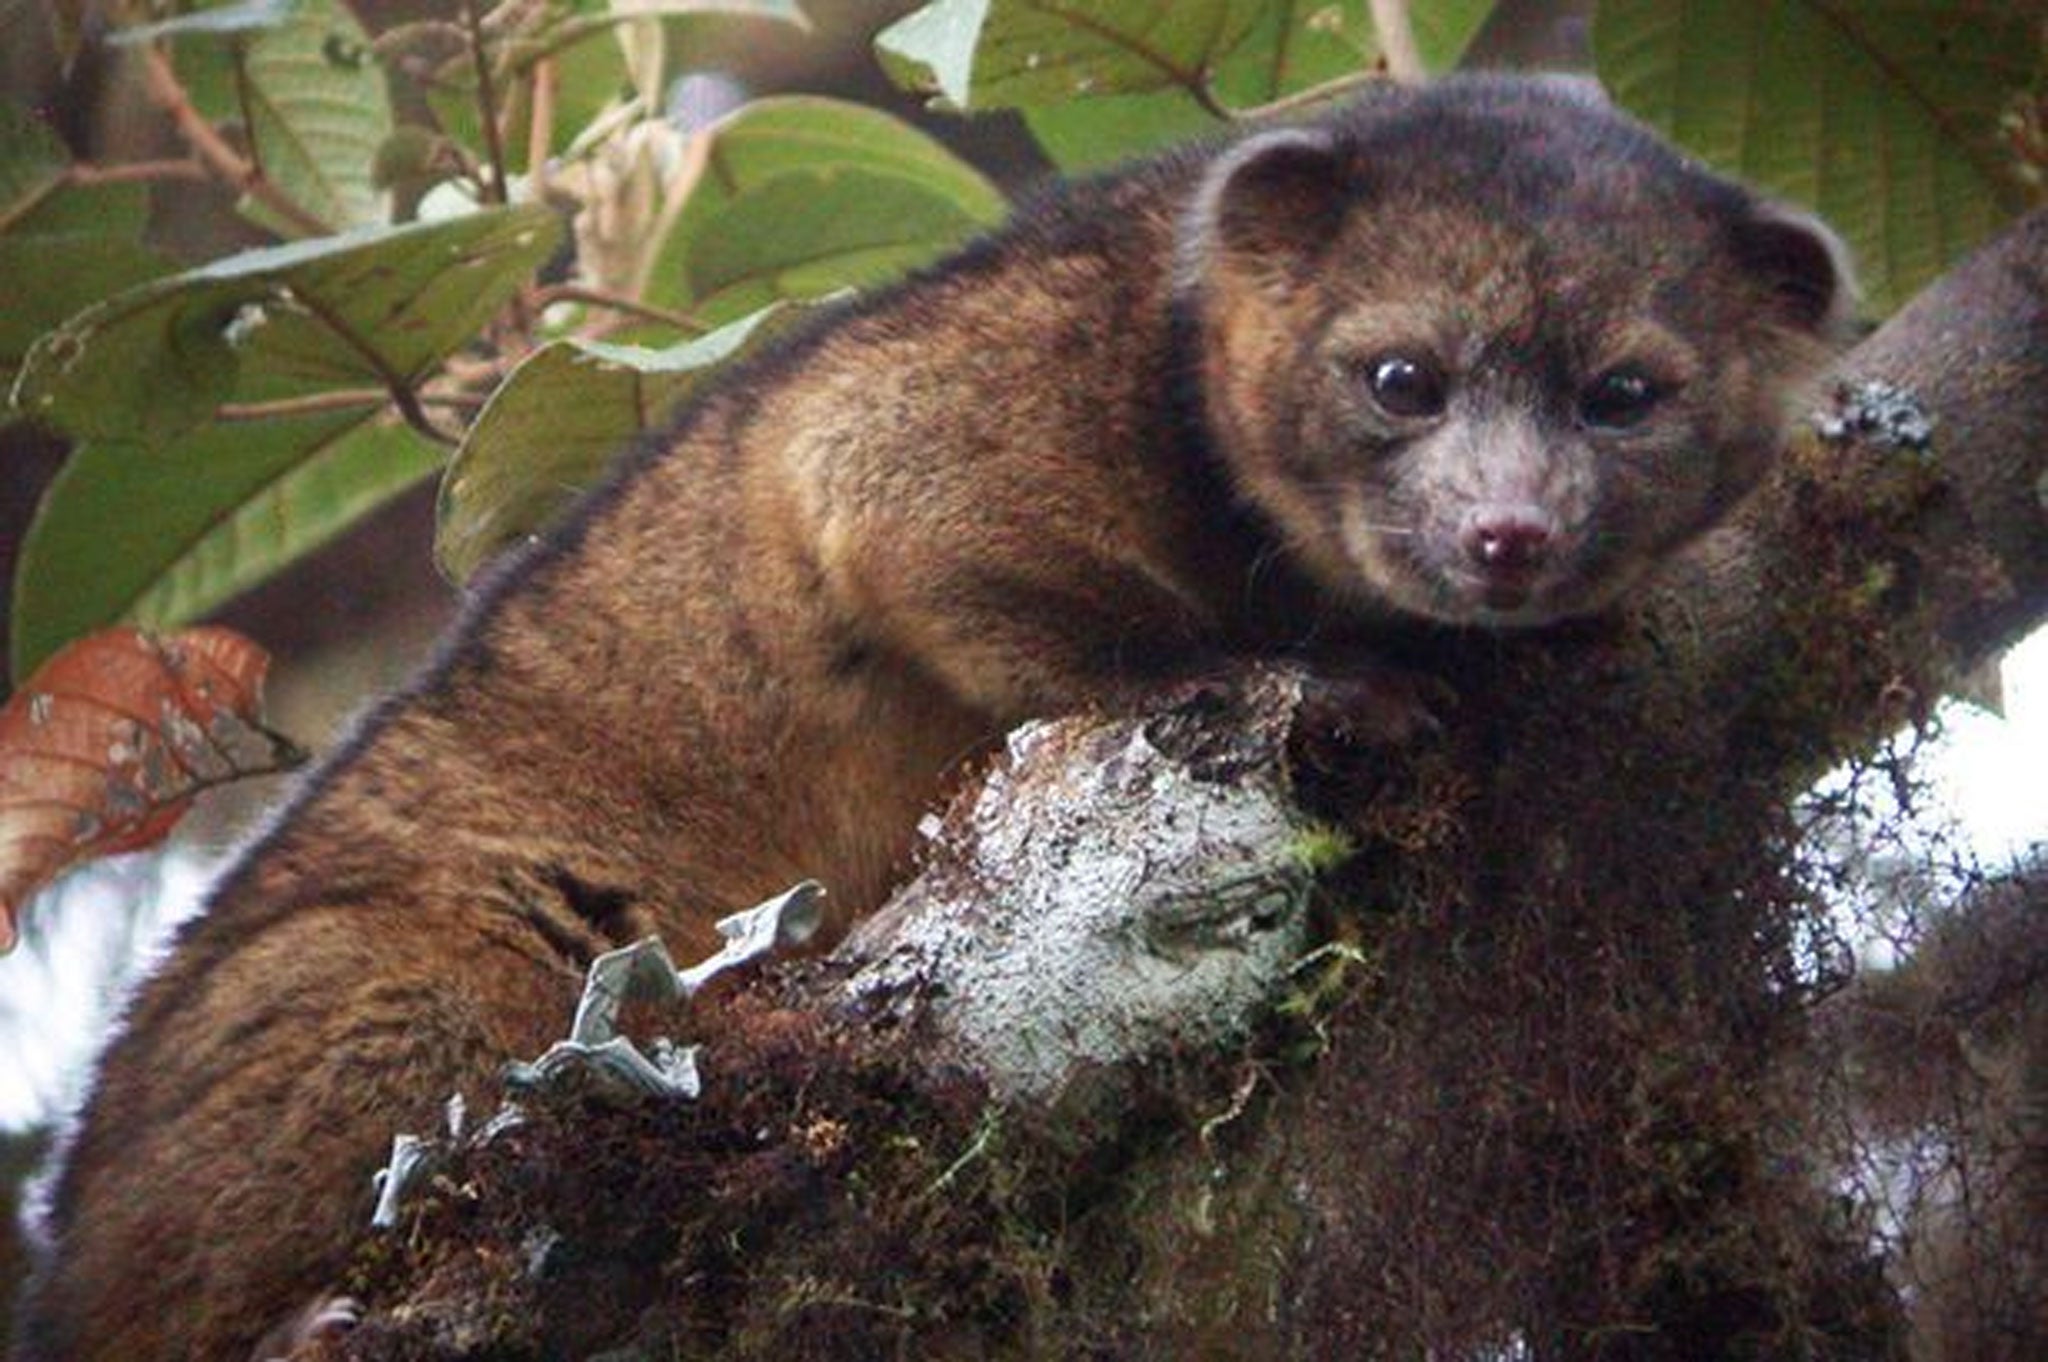 The olinguito has been described as a cross between a “teddy bear and a house cat”, and with solid scientific comparisons like that it’s not hard to see why the animal suffered a century of mistaken identity.